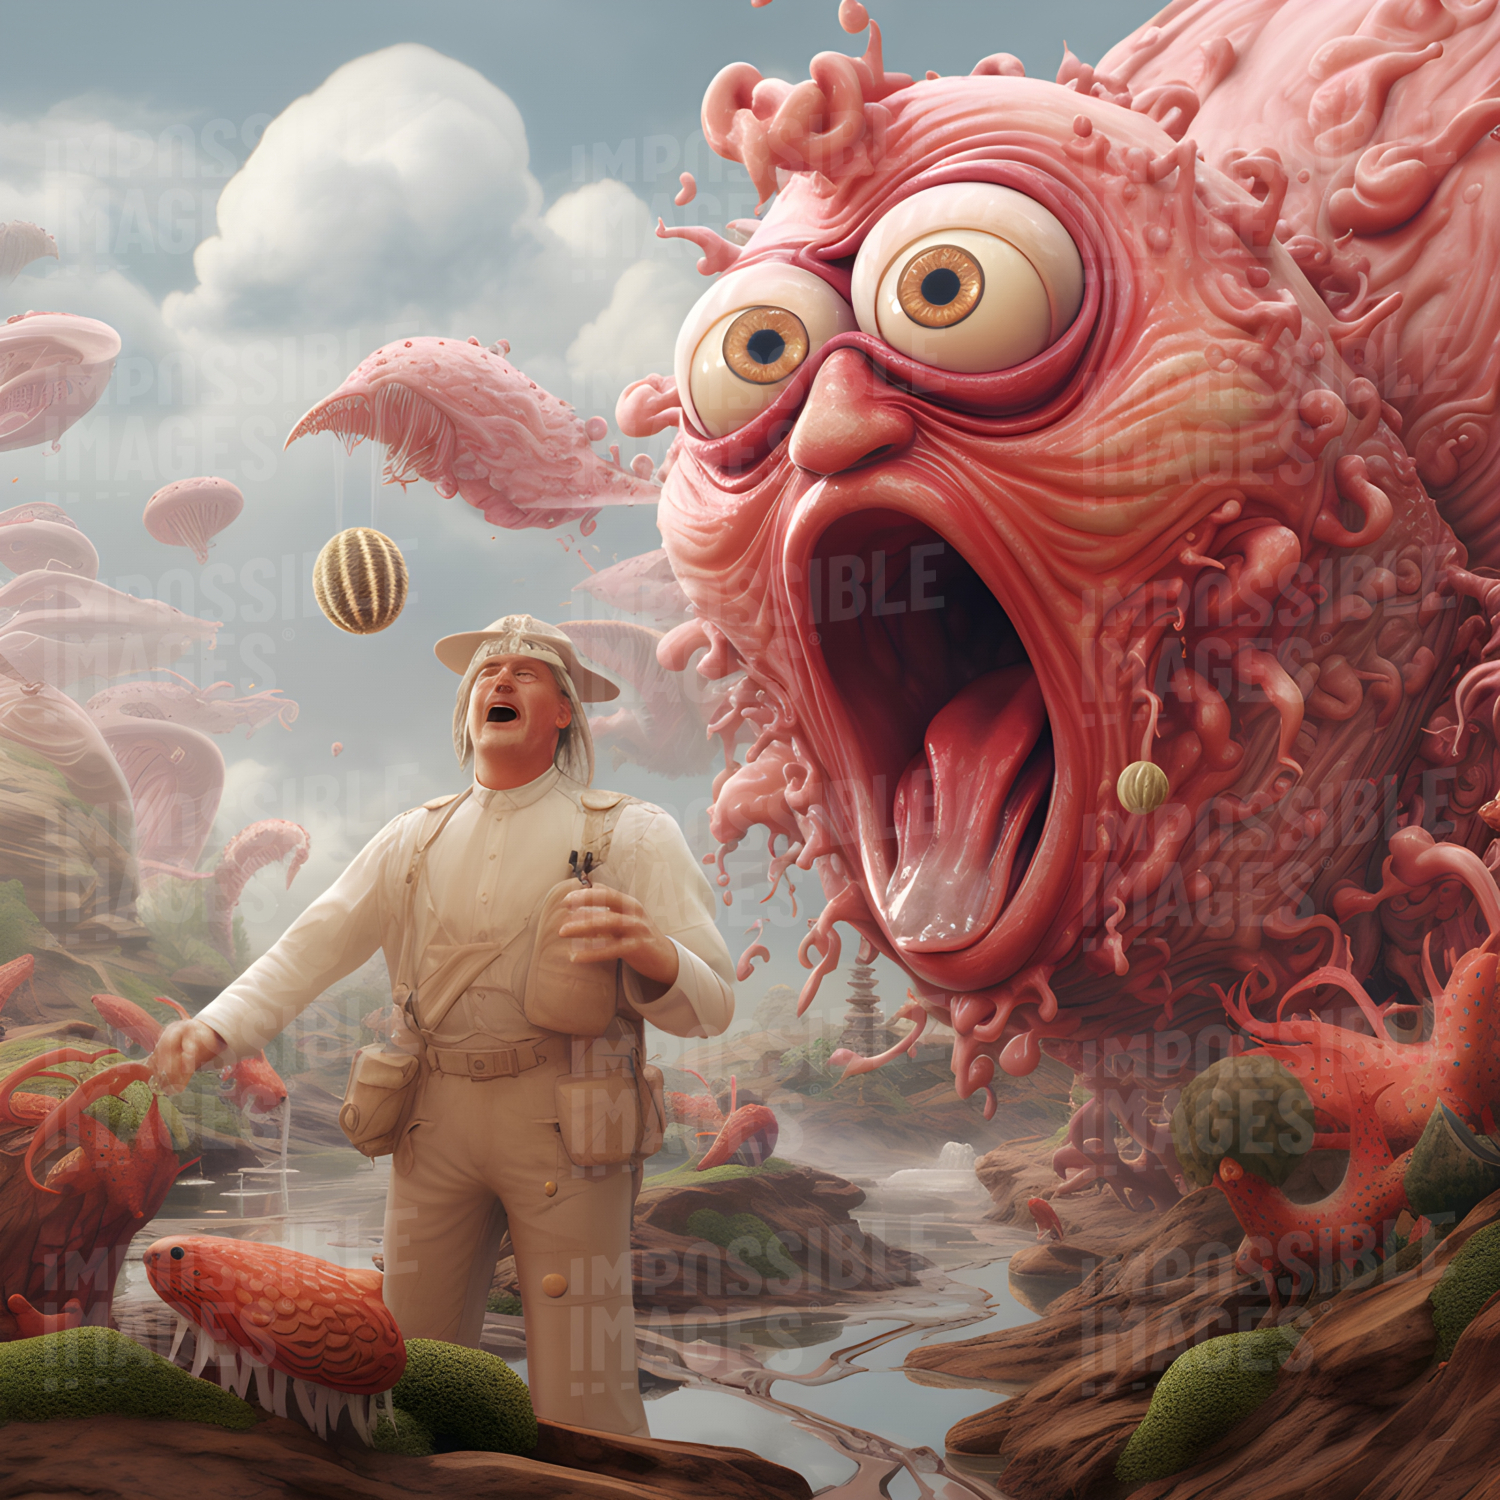 Grotesque pink semi-human tentacled creature chases a man in strange clothes through a weird surreal landscape - 